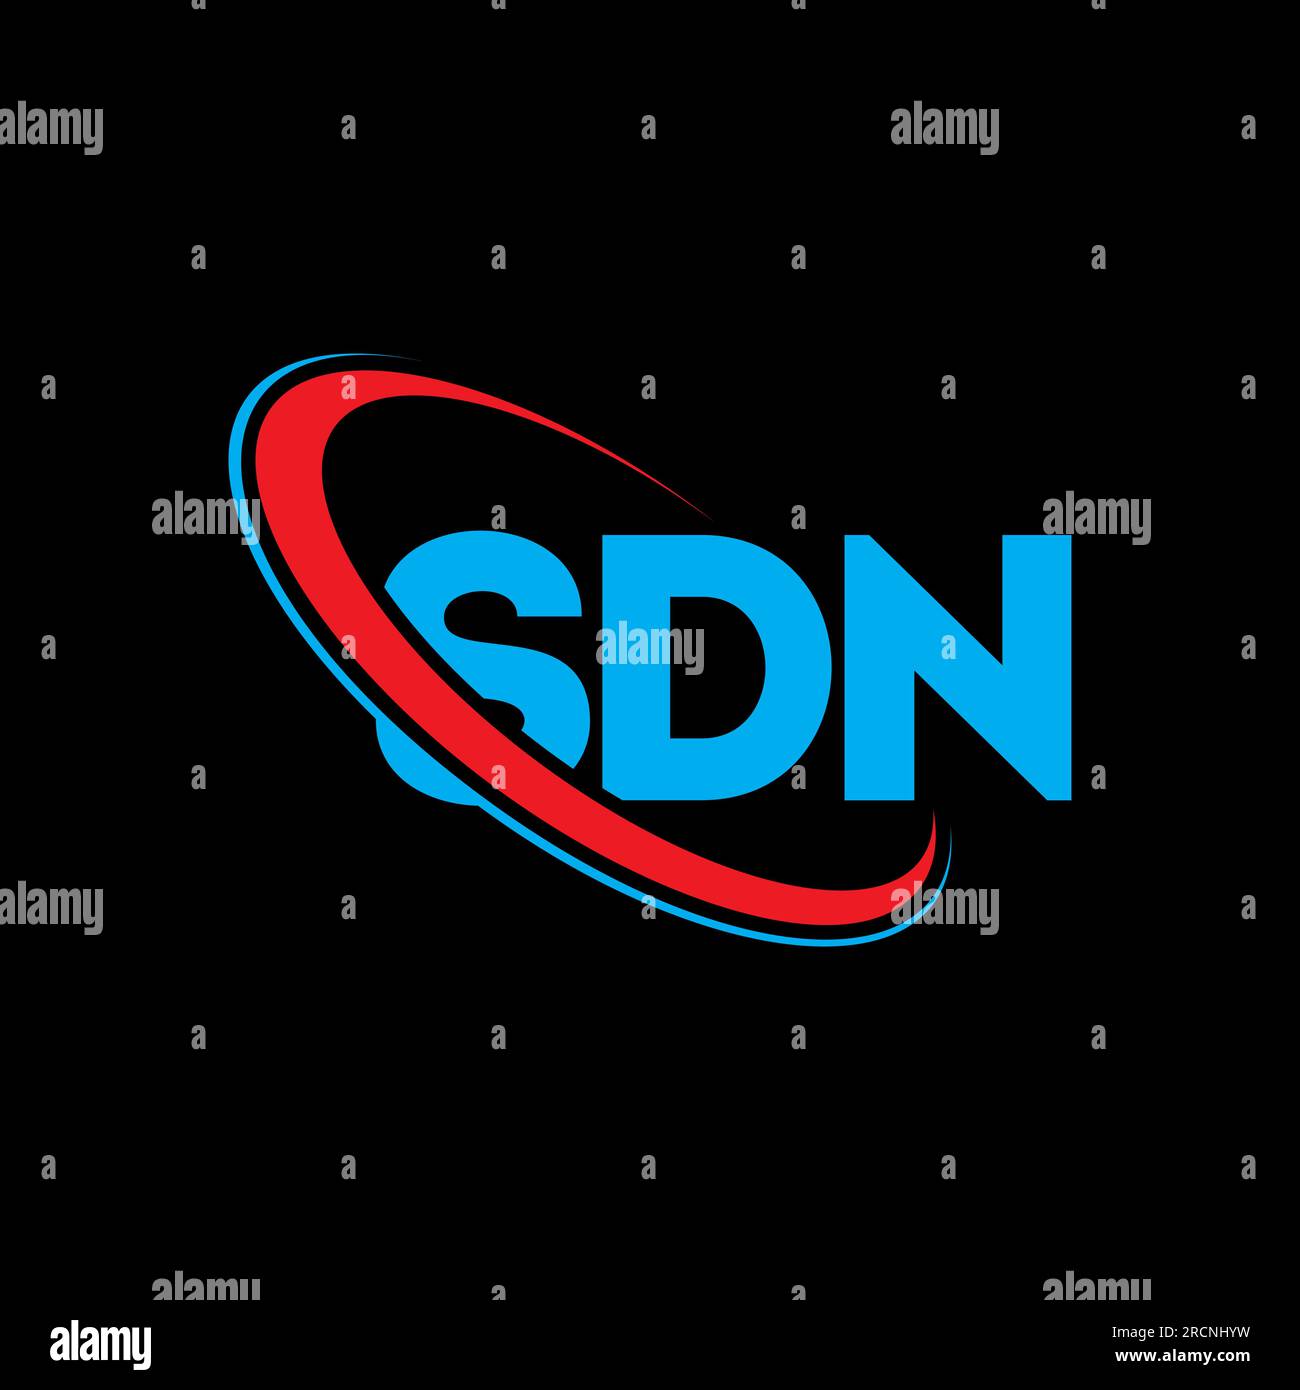 SDN logo. SDN letter. SDN letter logo design. Initials SDN logo linked with circle and uppercase monogram logo. SDN typography for technology, busines Stock Vector